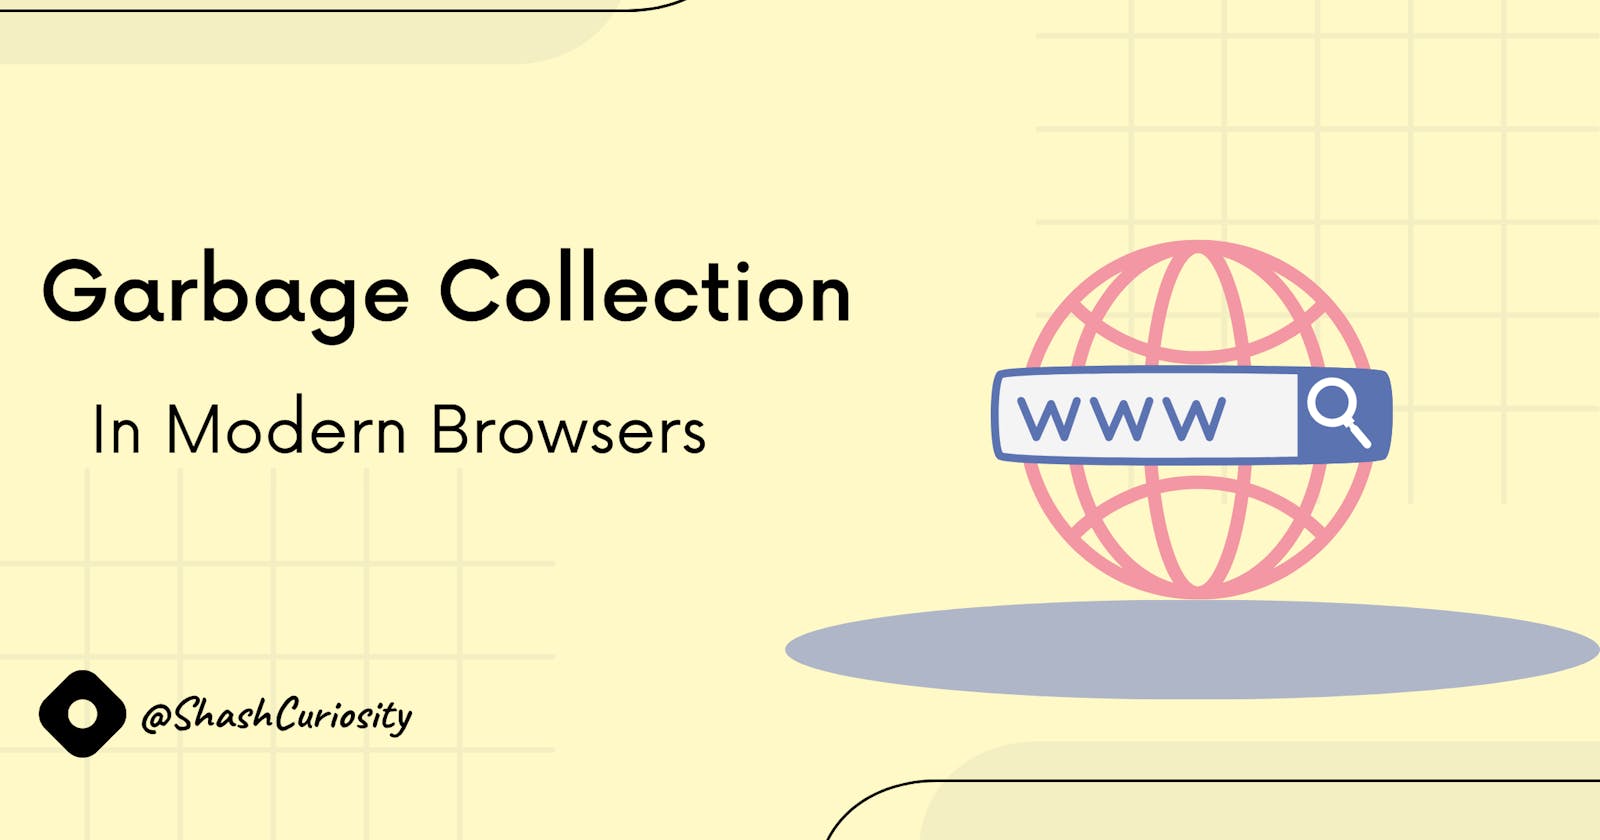 Garbage Collection in Modern Browsers